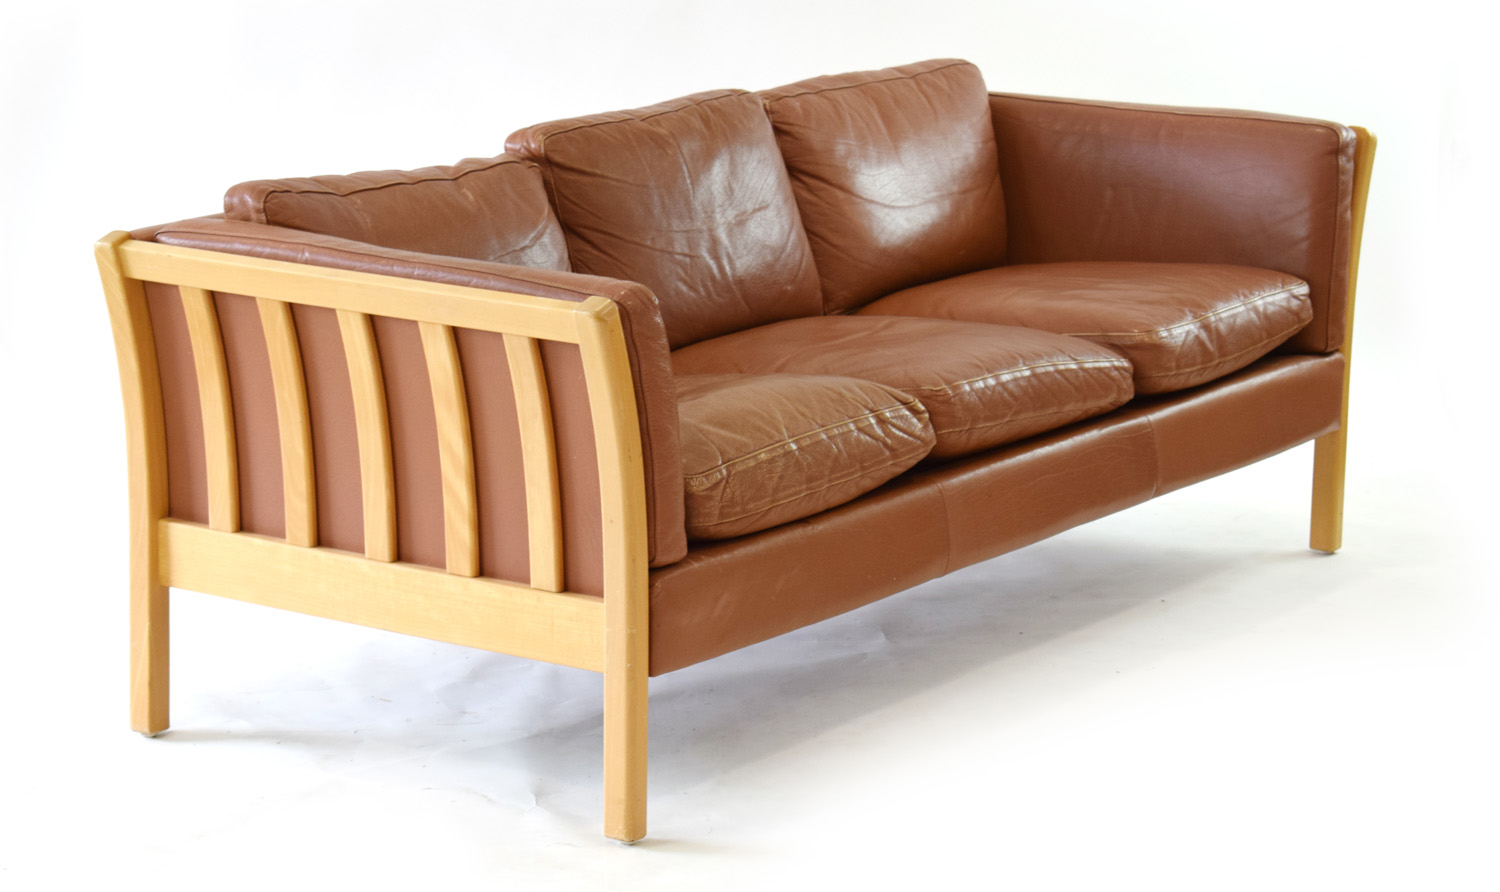 A Danish tan leather three seater sofa with an exposed beech frame, by Stouby, l.